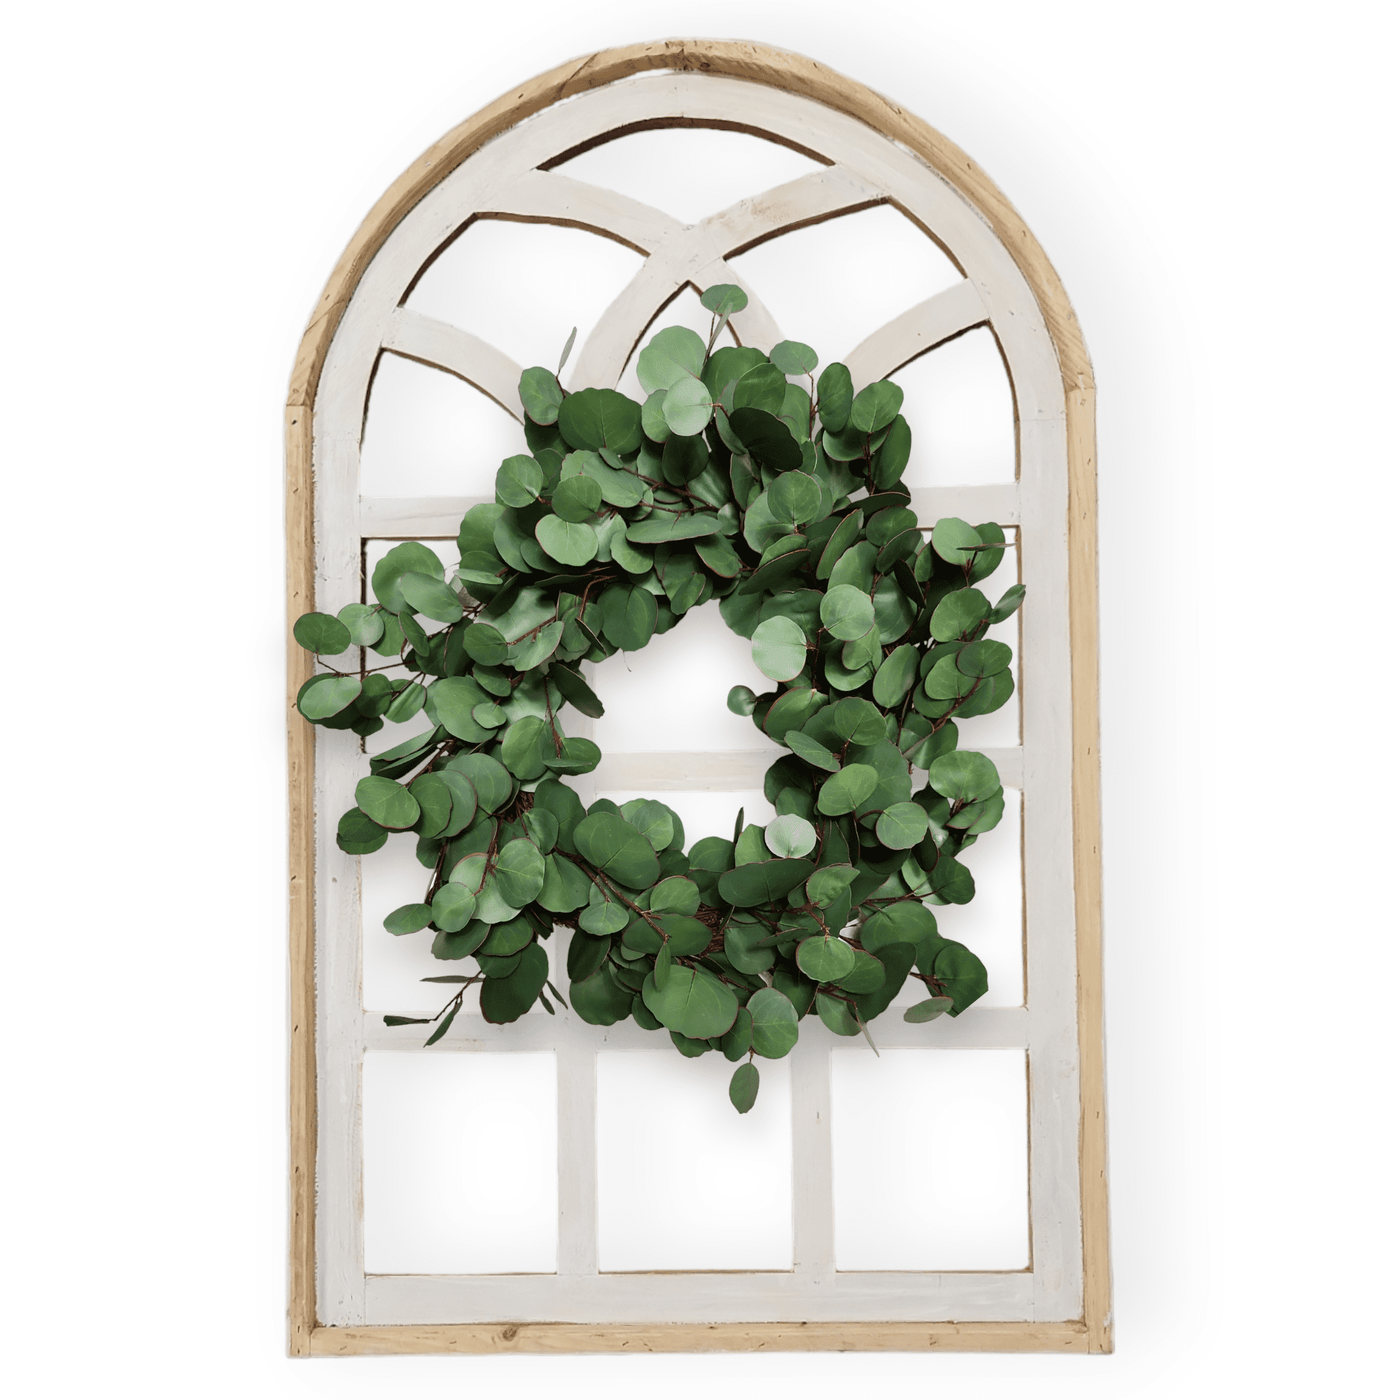 Farmhouse Wooden Wall Window Arch - The Paradise Fields Large Wood Window Frame 2 Sizes 44" and 48" - Paradise Fields + Wreaths wall windowsRanch Junkie